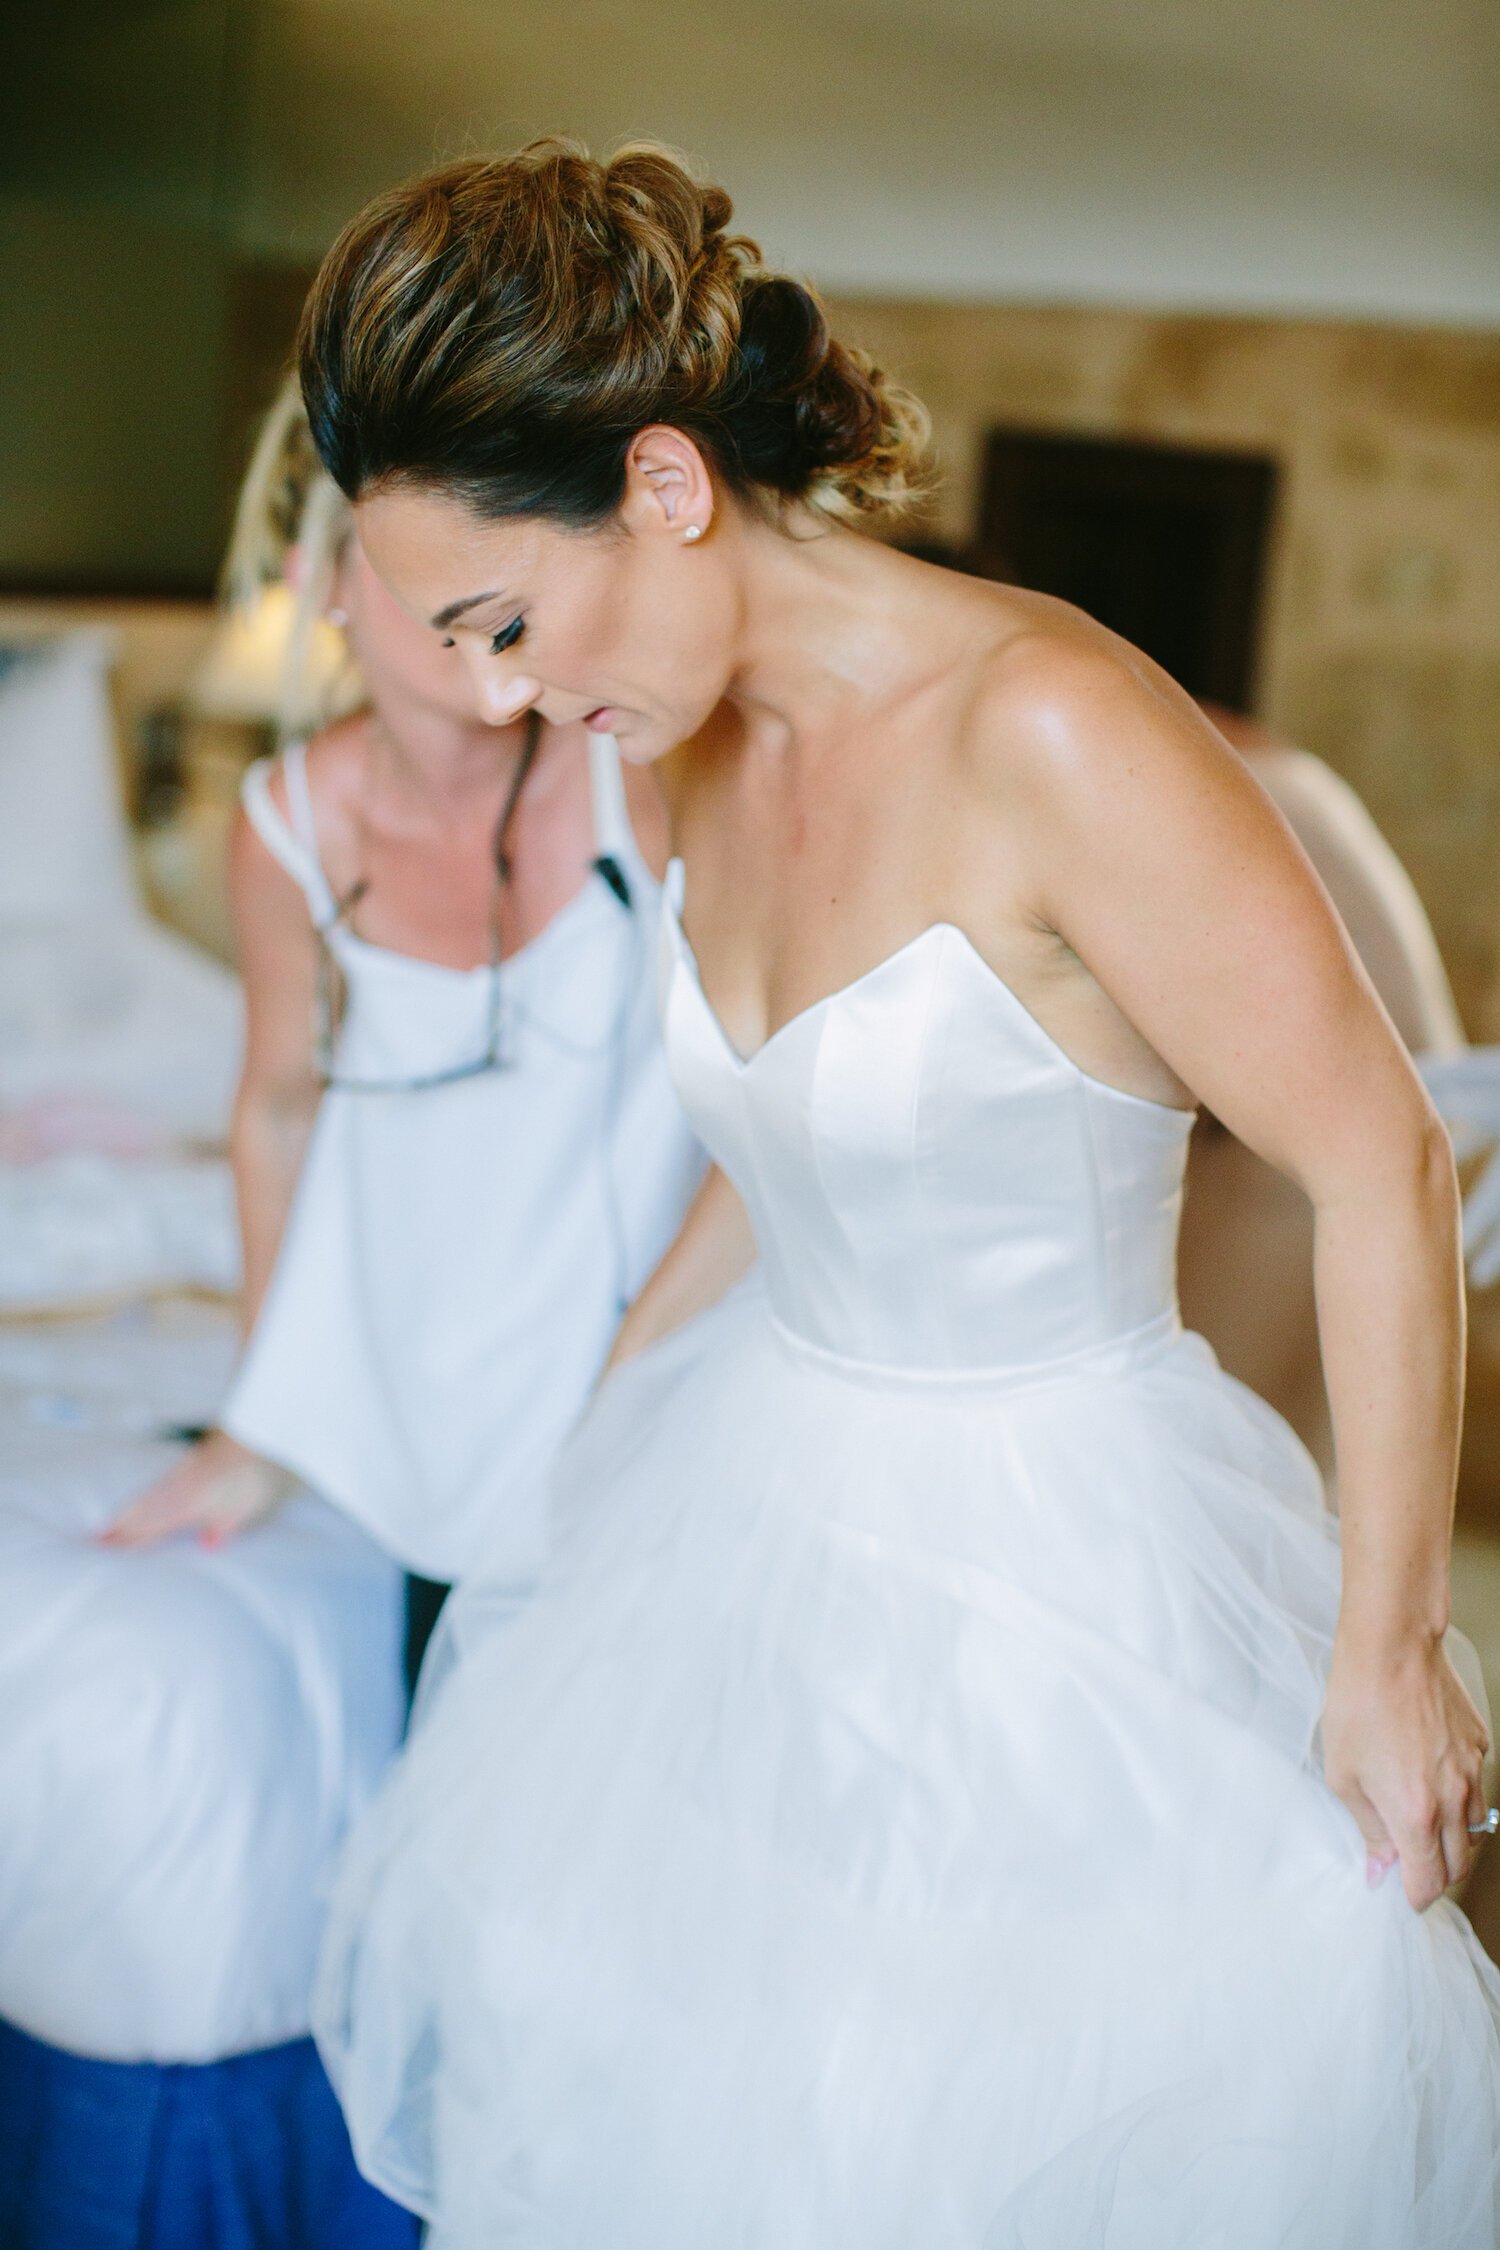 Beautiful bride Denise wore the Rita skirt and Ladbroke corset by Halfpenny London for her wedding day